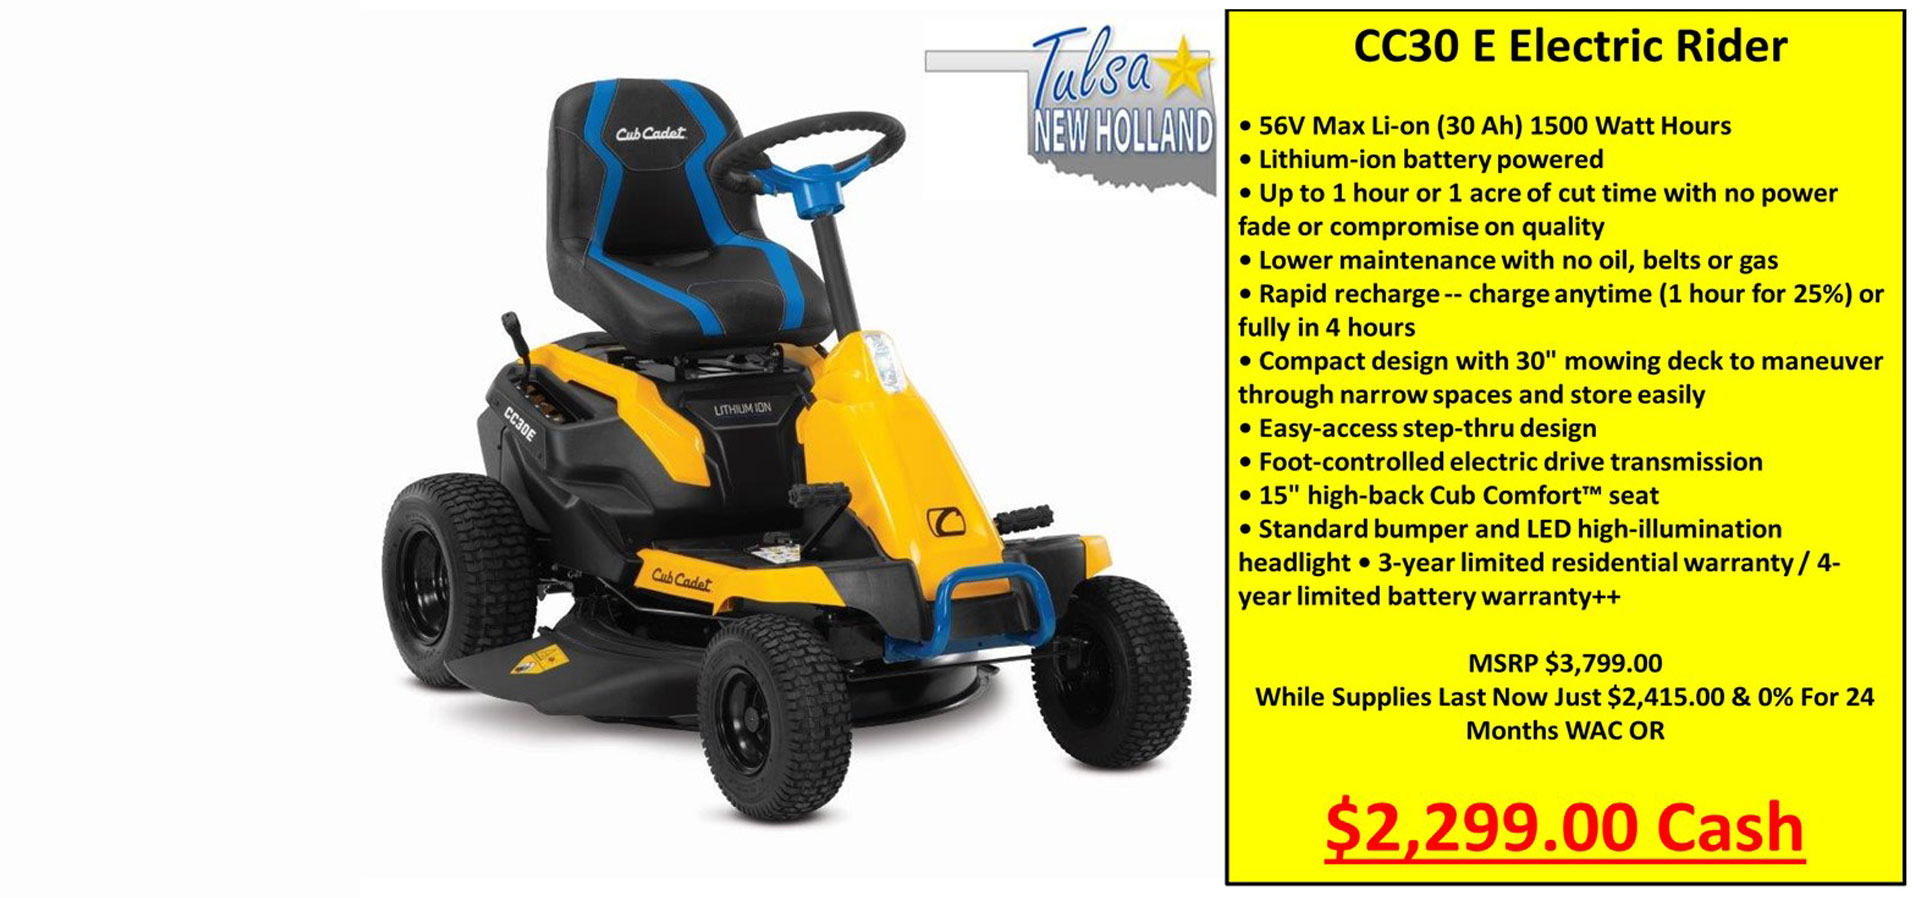 Tulsa New Holland, INC - CC30 E Electric Rider - Special Financing And Cash Price Offer